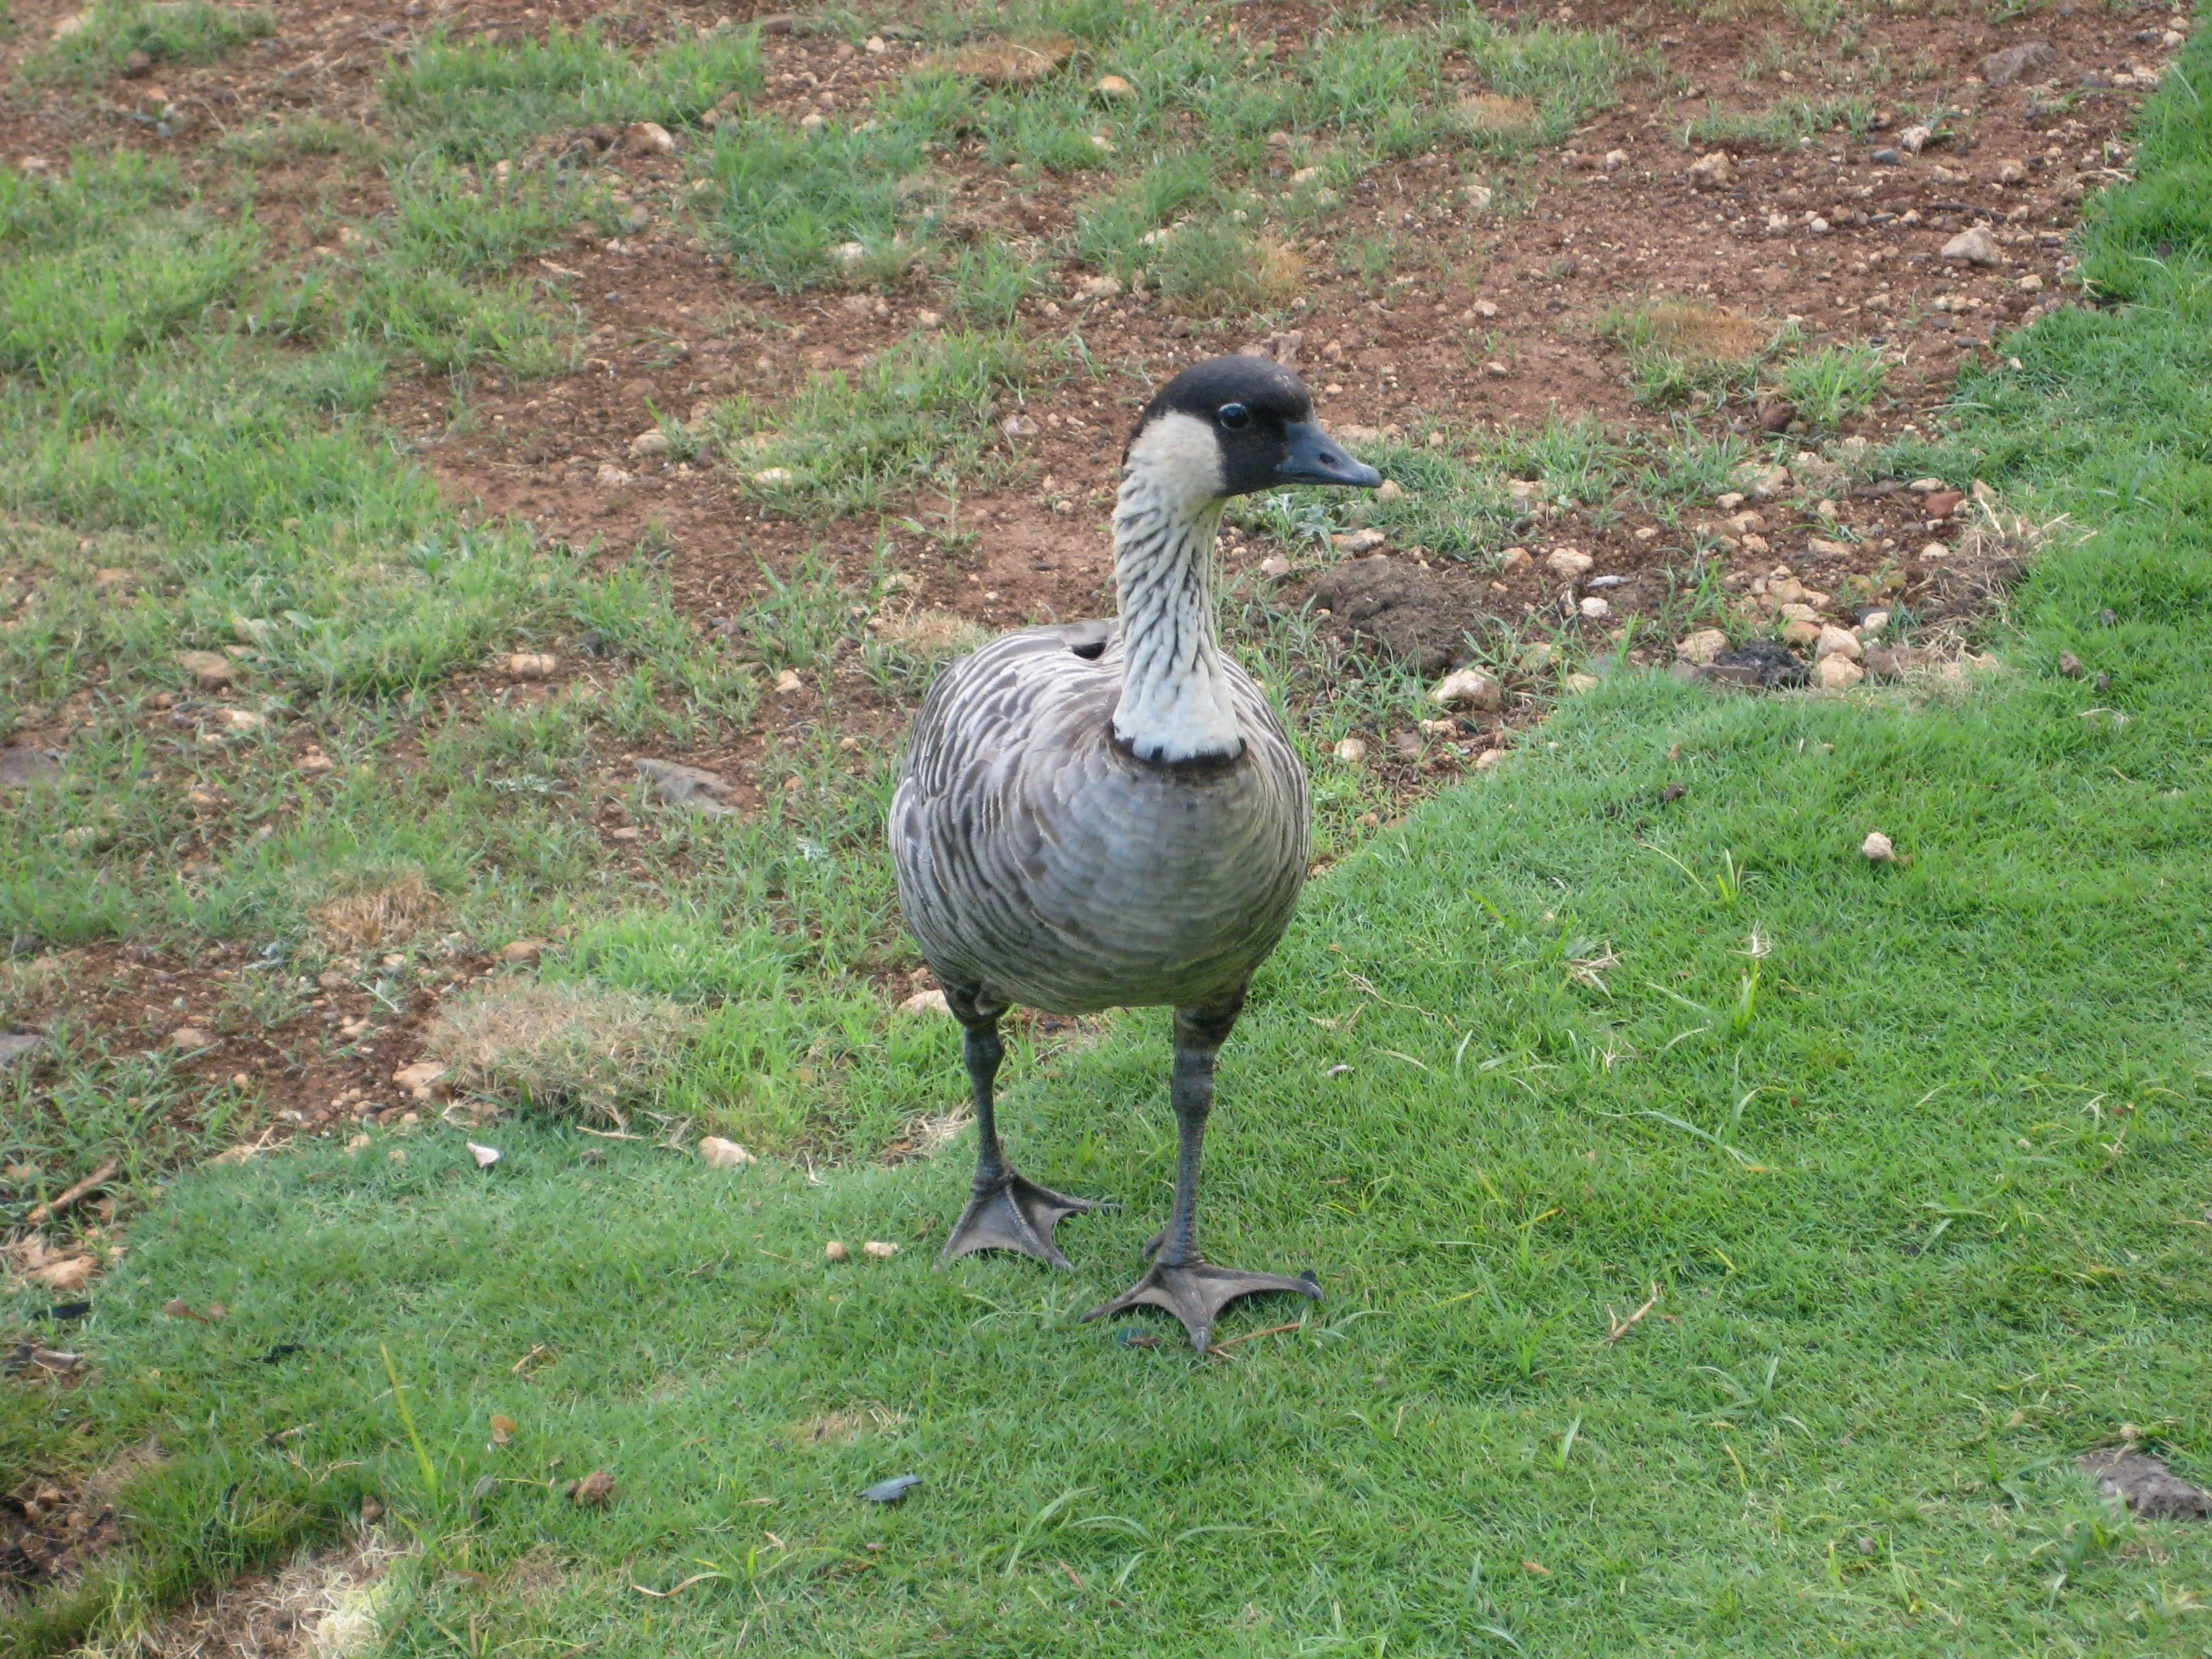 Nene, or Hawaiian goose. The official state bird. This one was very friendly and came close, looking for a handout. 